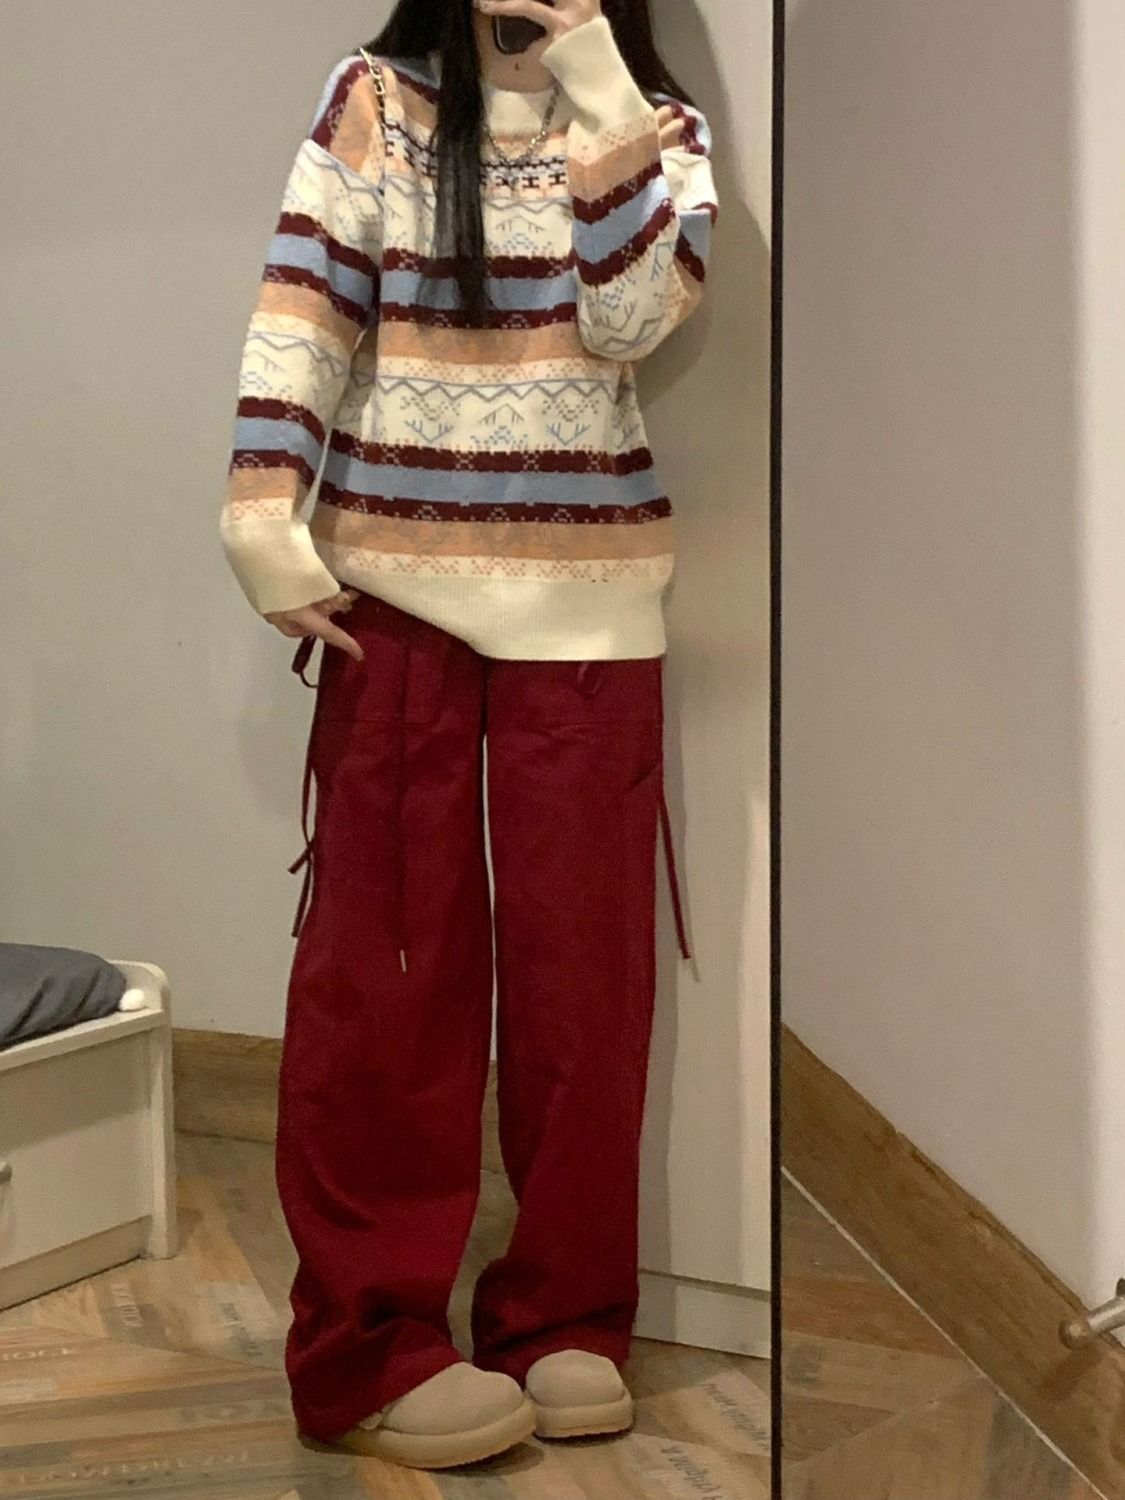 Plus size women's autumn suit women's  new college style color block striped sweater red overalls two-piece set